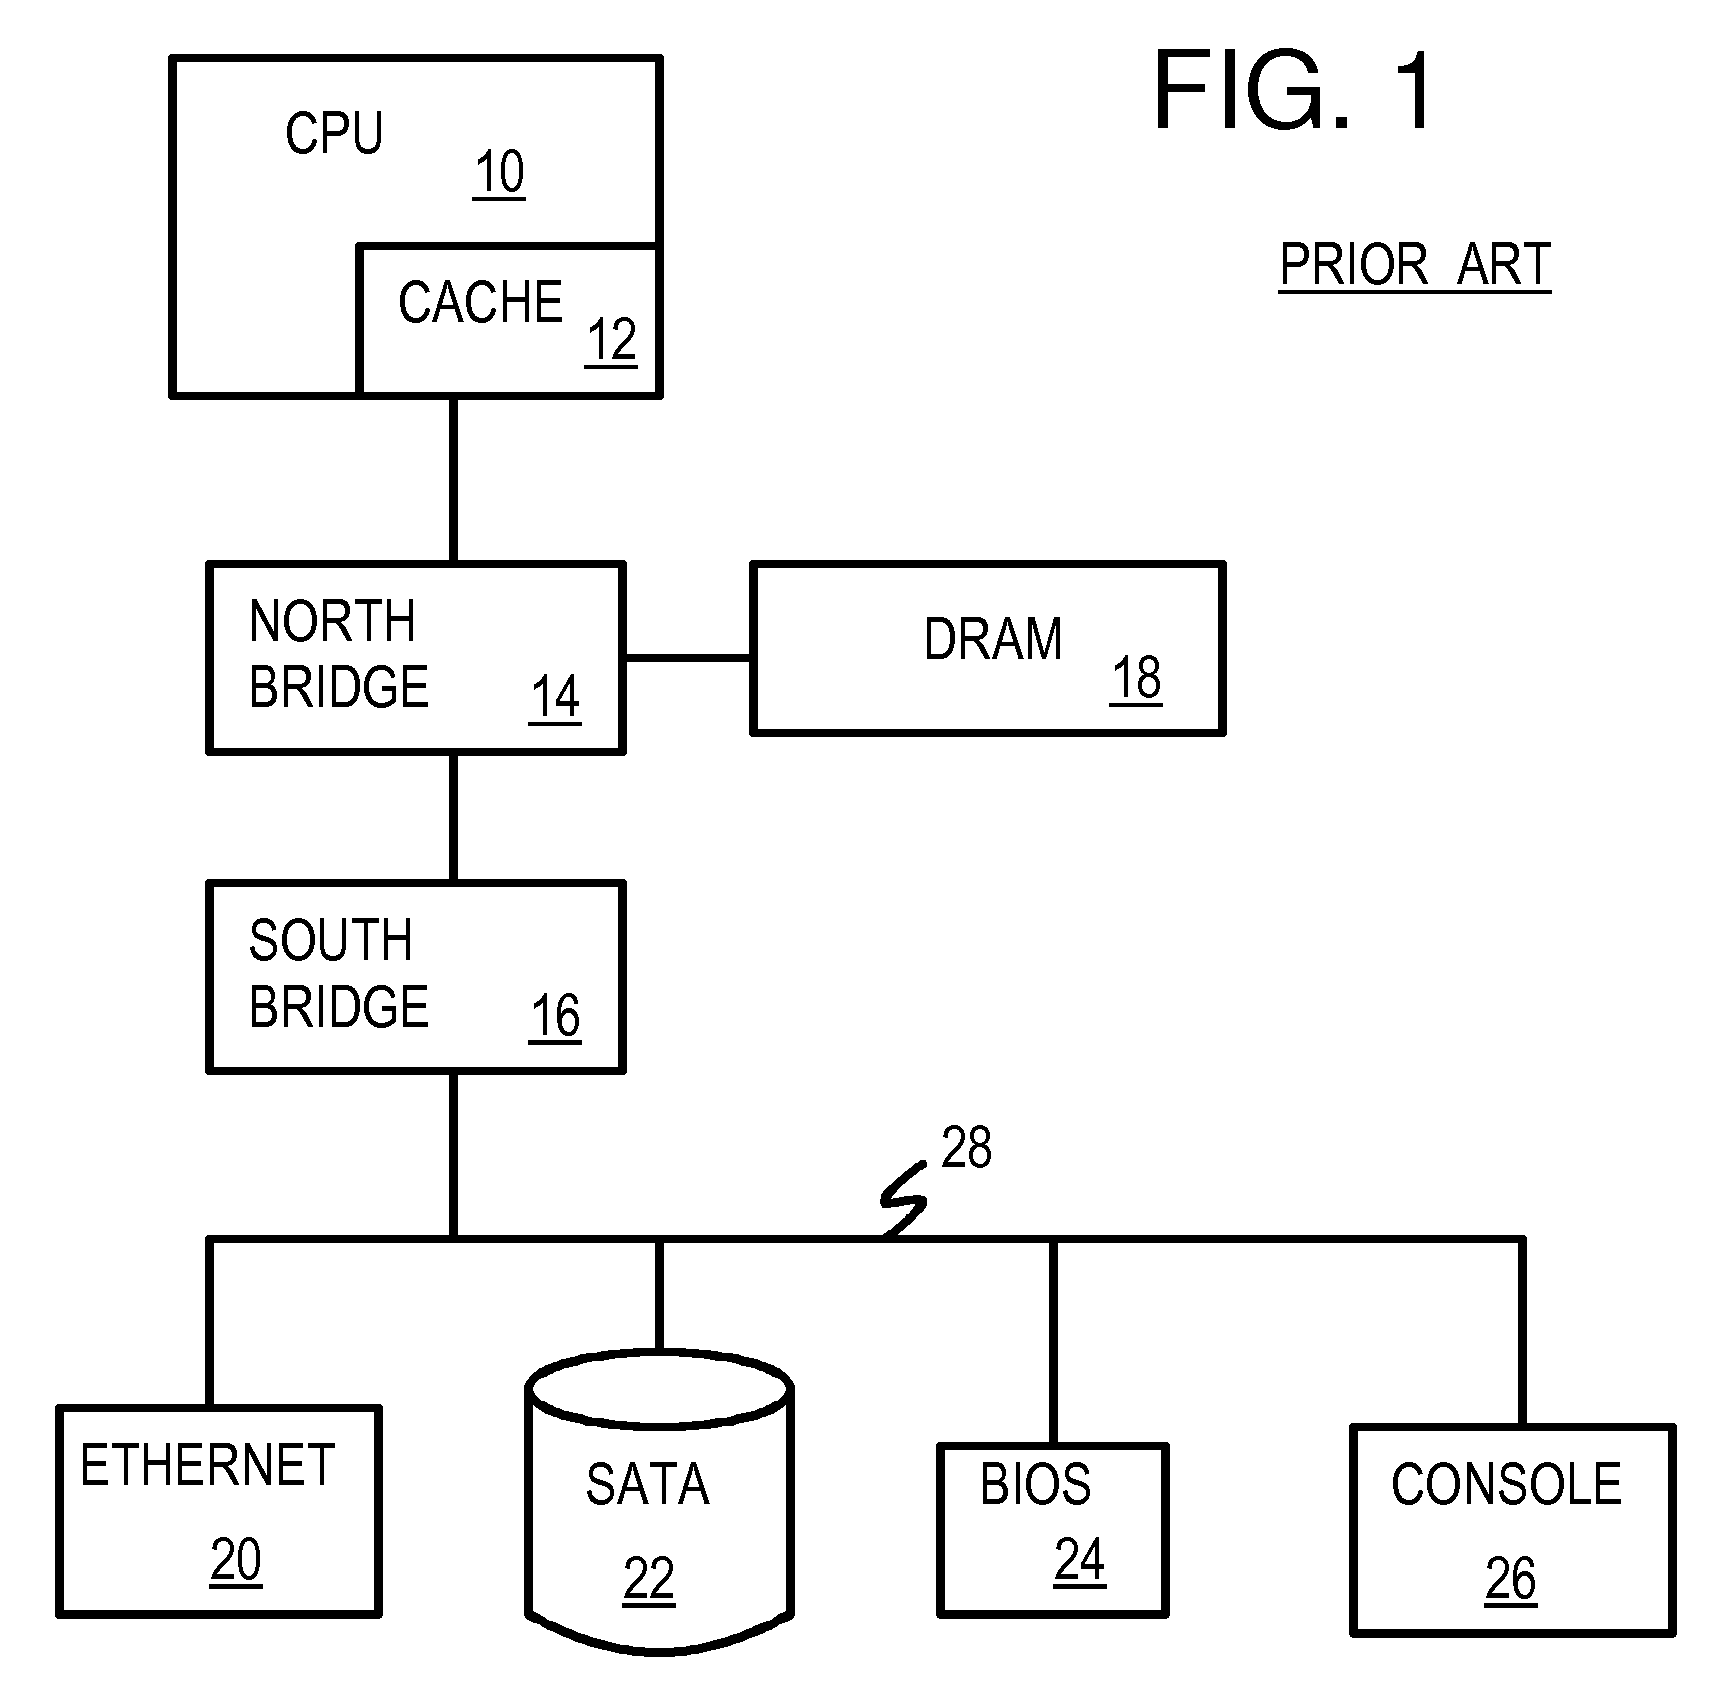 Hardware-Based Virtualization of BIOS, Disks, Network-Interfaces, & Consoles Using a Direct Interconnect Fabric